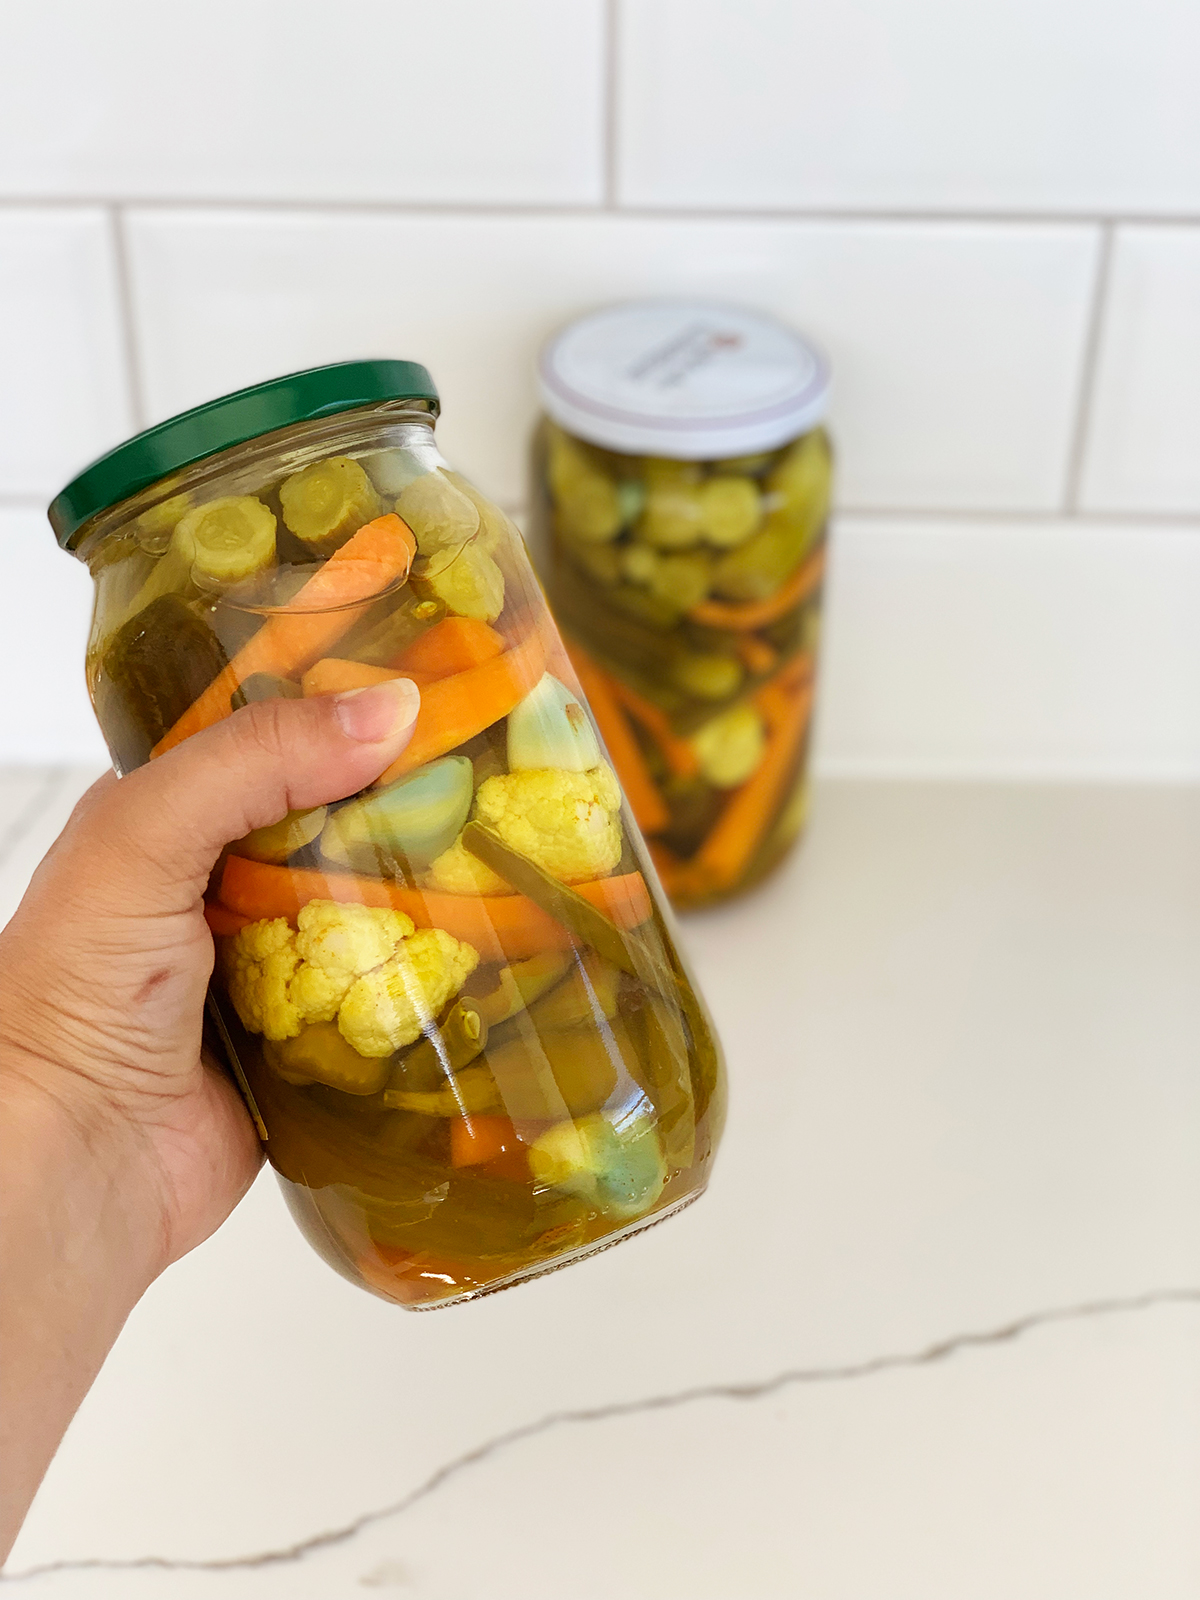 How to make pickled vegetable recipe - Armenian Tourshi in a jar with a hand